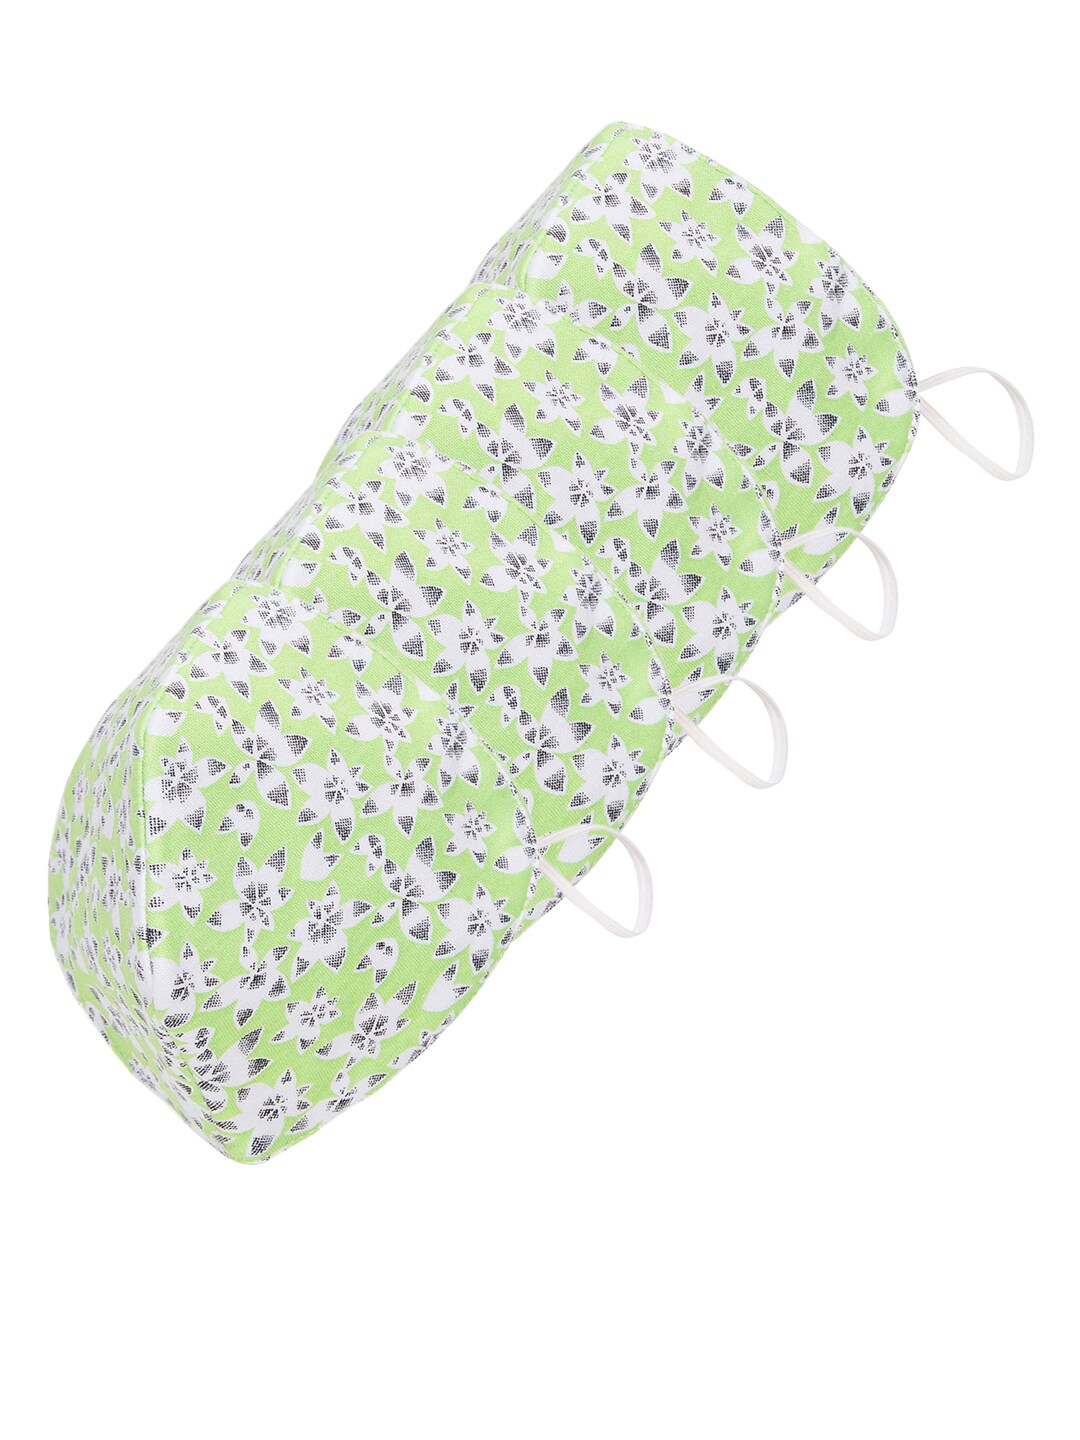 SOJANYA Unisex Pack of 4 Green & White Floral Print 3-Ply Reusable Outdoor Cloth Masks Price in India